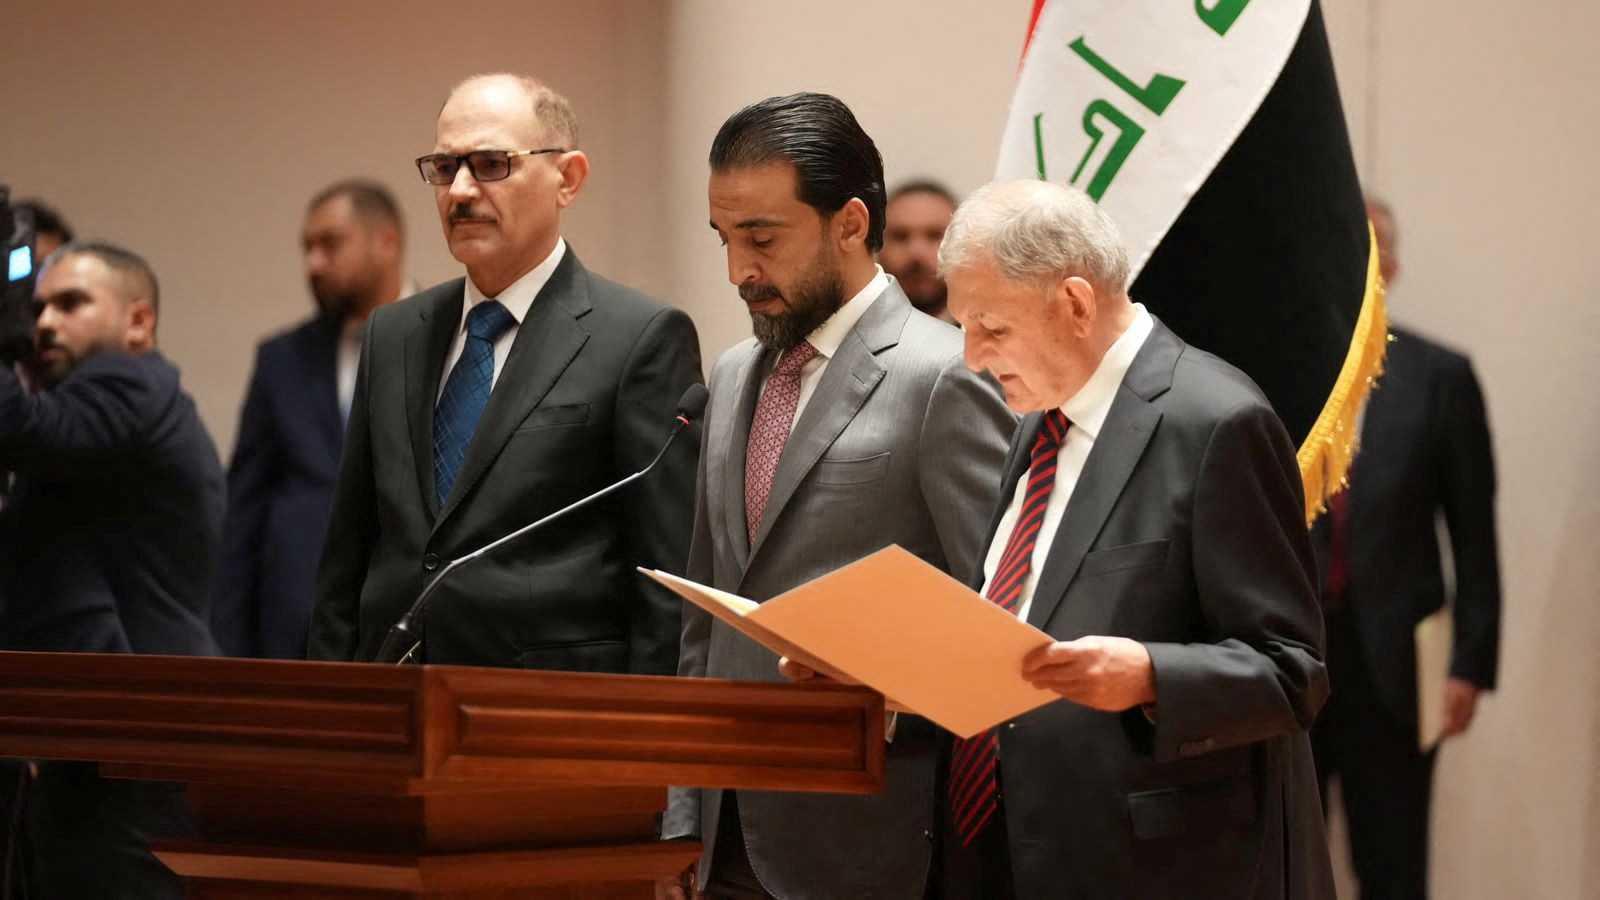 Abdul Latif Rashid takes his oath of office in front of Iraqi lawmakers in Baghdad, Iraq, Oct 13. Photo: Reuters